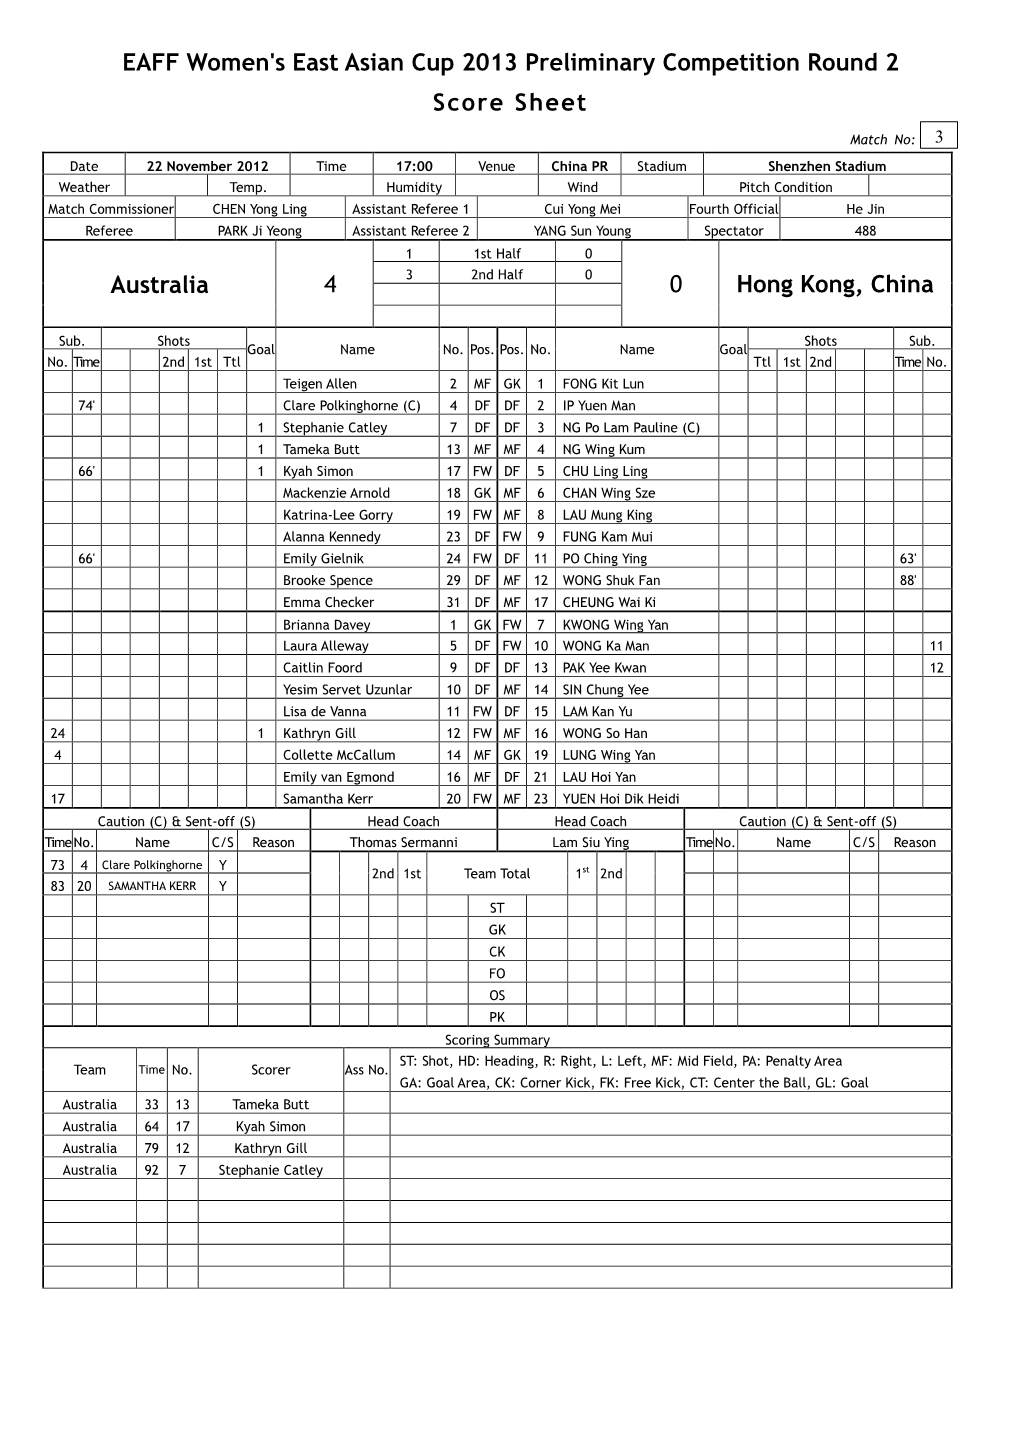 EAFF Women's East Asian Cup 2013 Preliminary Competition Round 2 Score Sheet